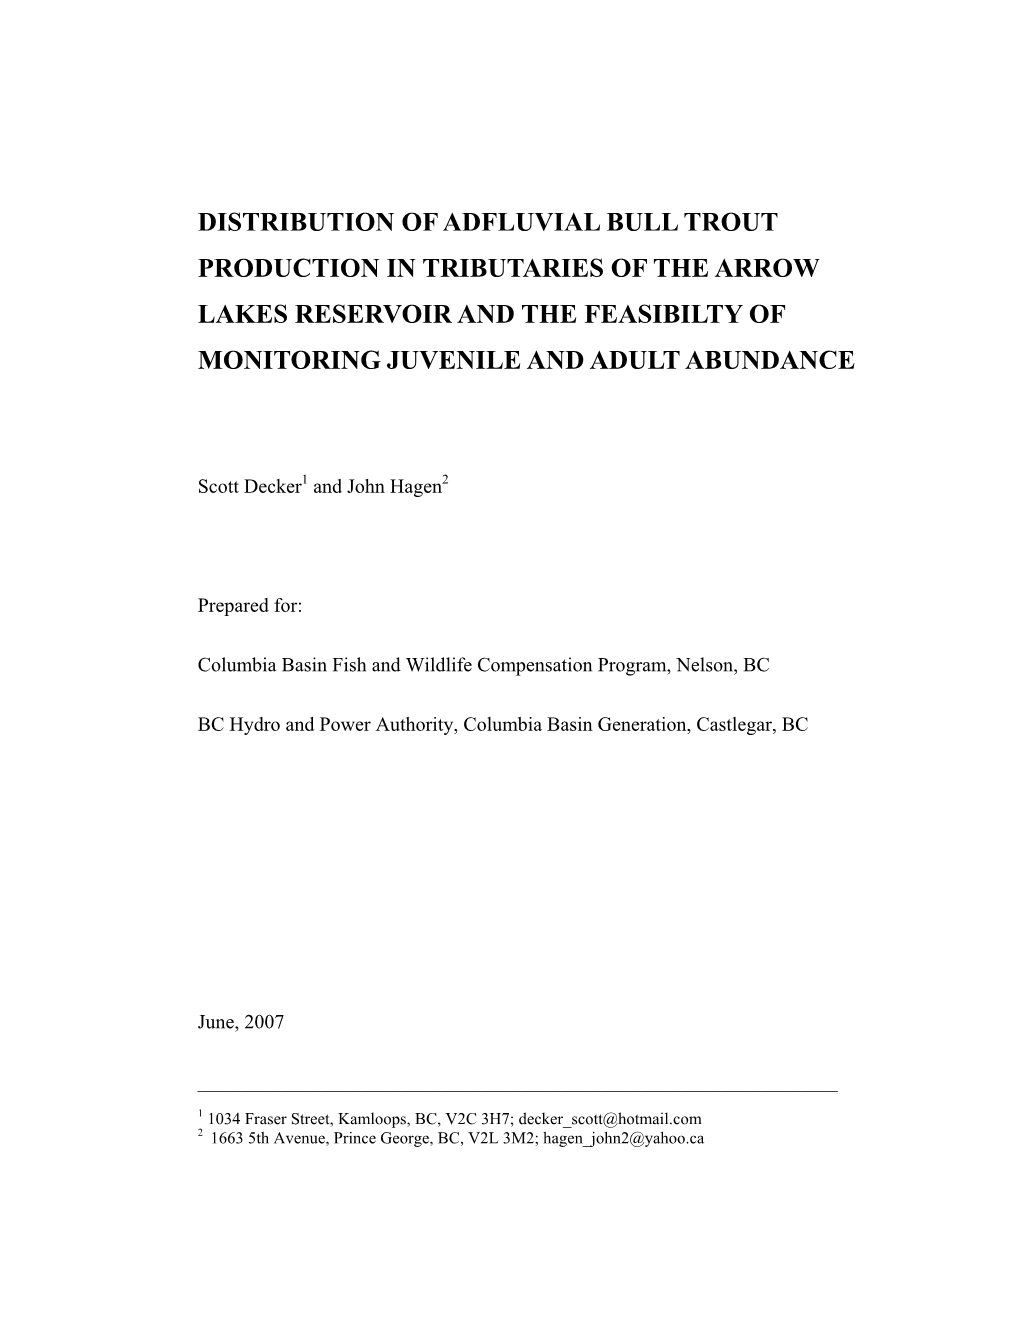 Distribution of Adfluvial Bull Trout Production in Tributaries of the Arrow Lakes Reservoir and the Feasibilty of Monitoring Juvenile and Adult Abundance